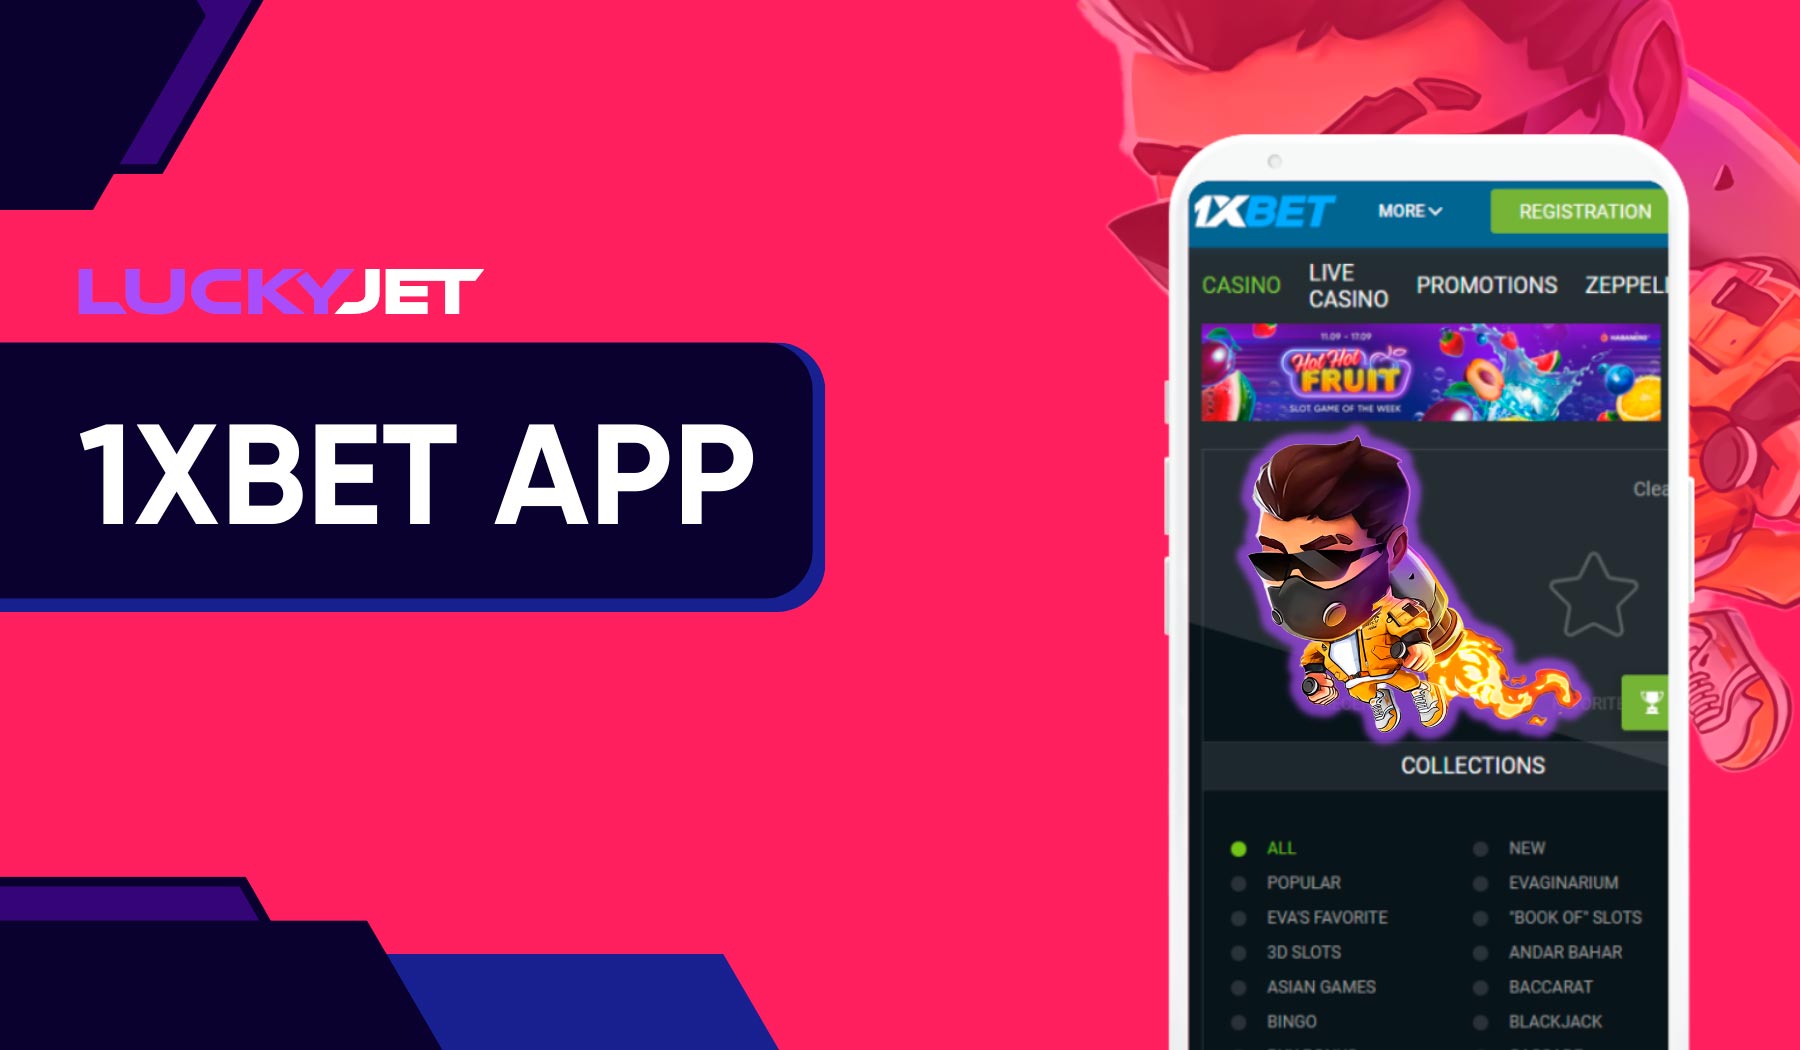 Thanks to the 1xbet mobile application, you can play Lucky Jet